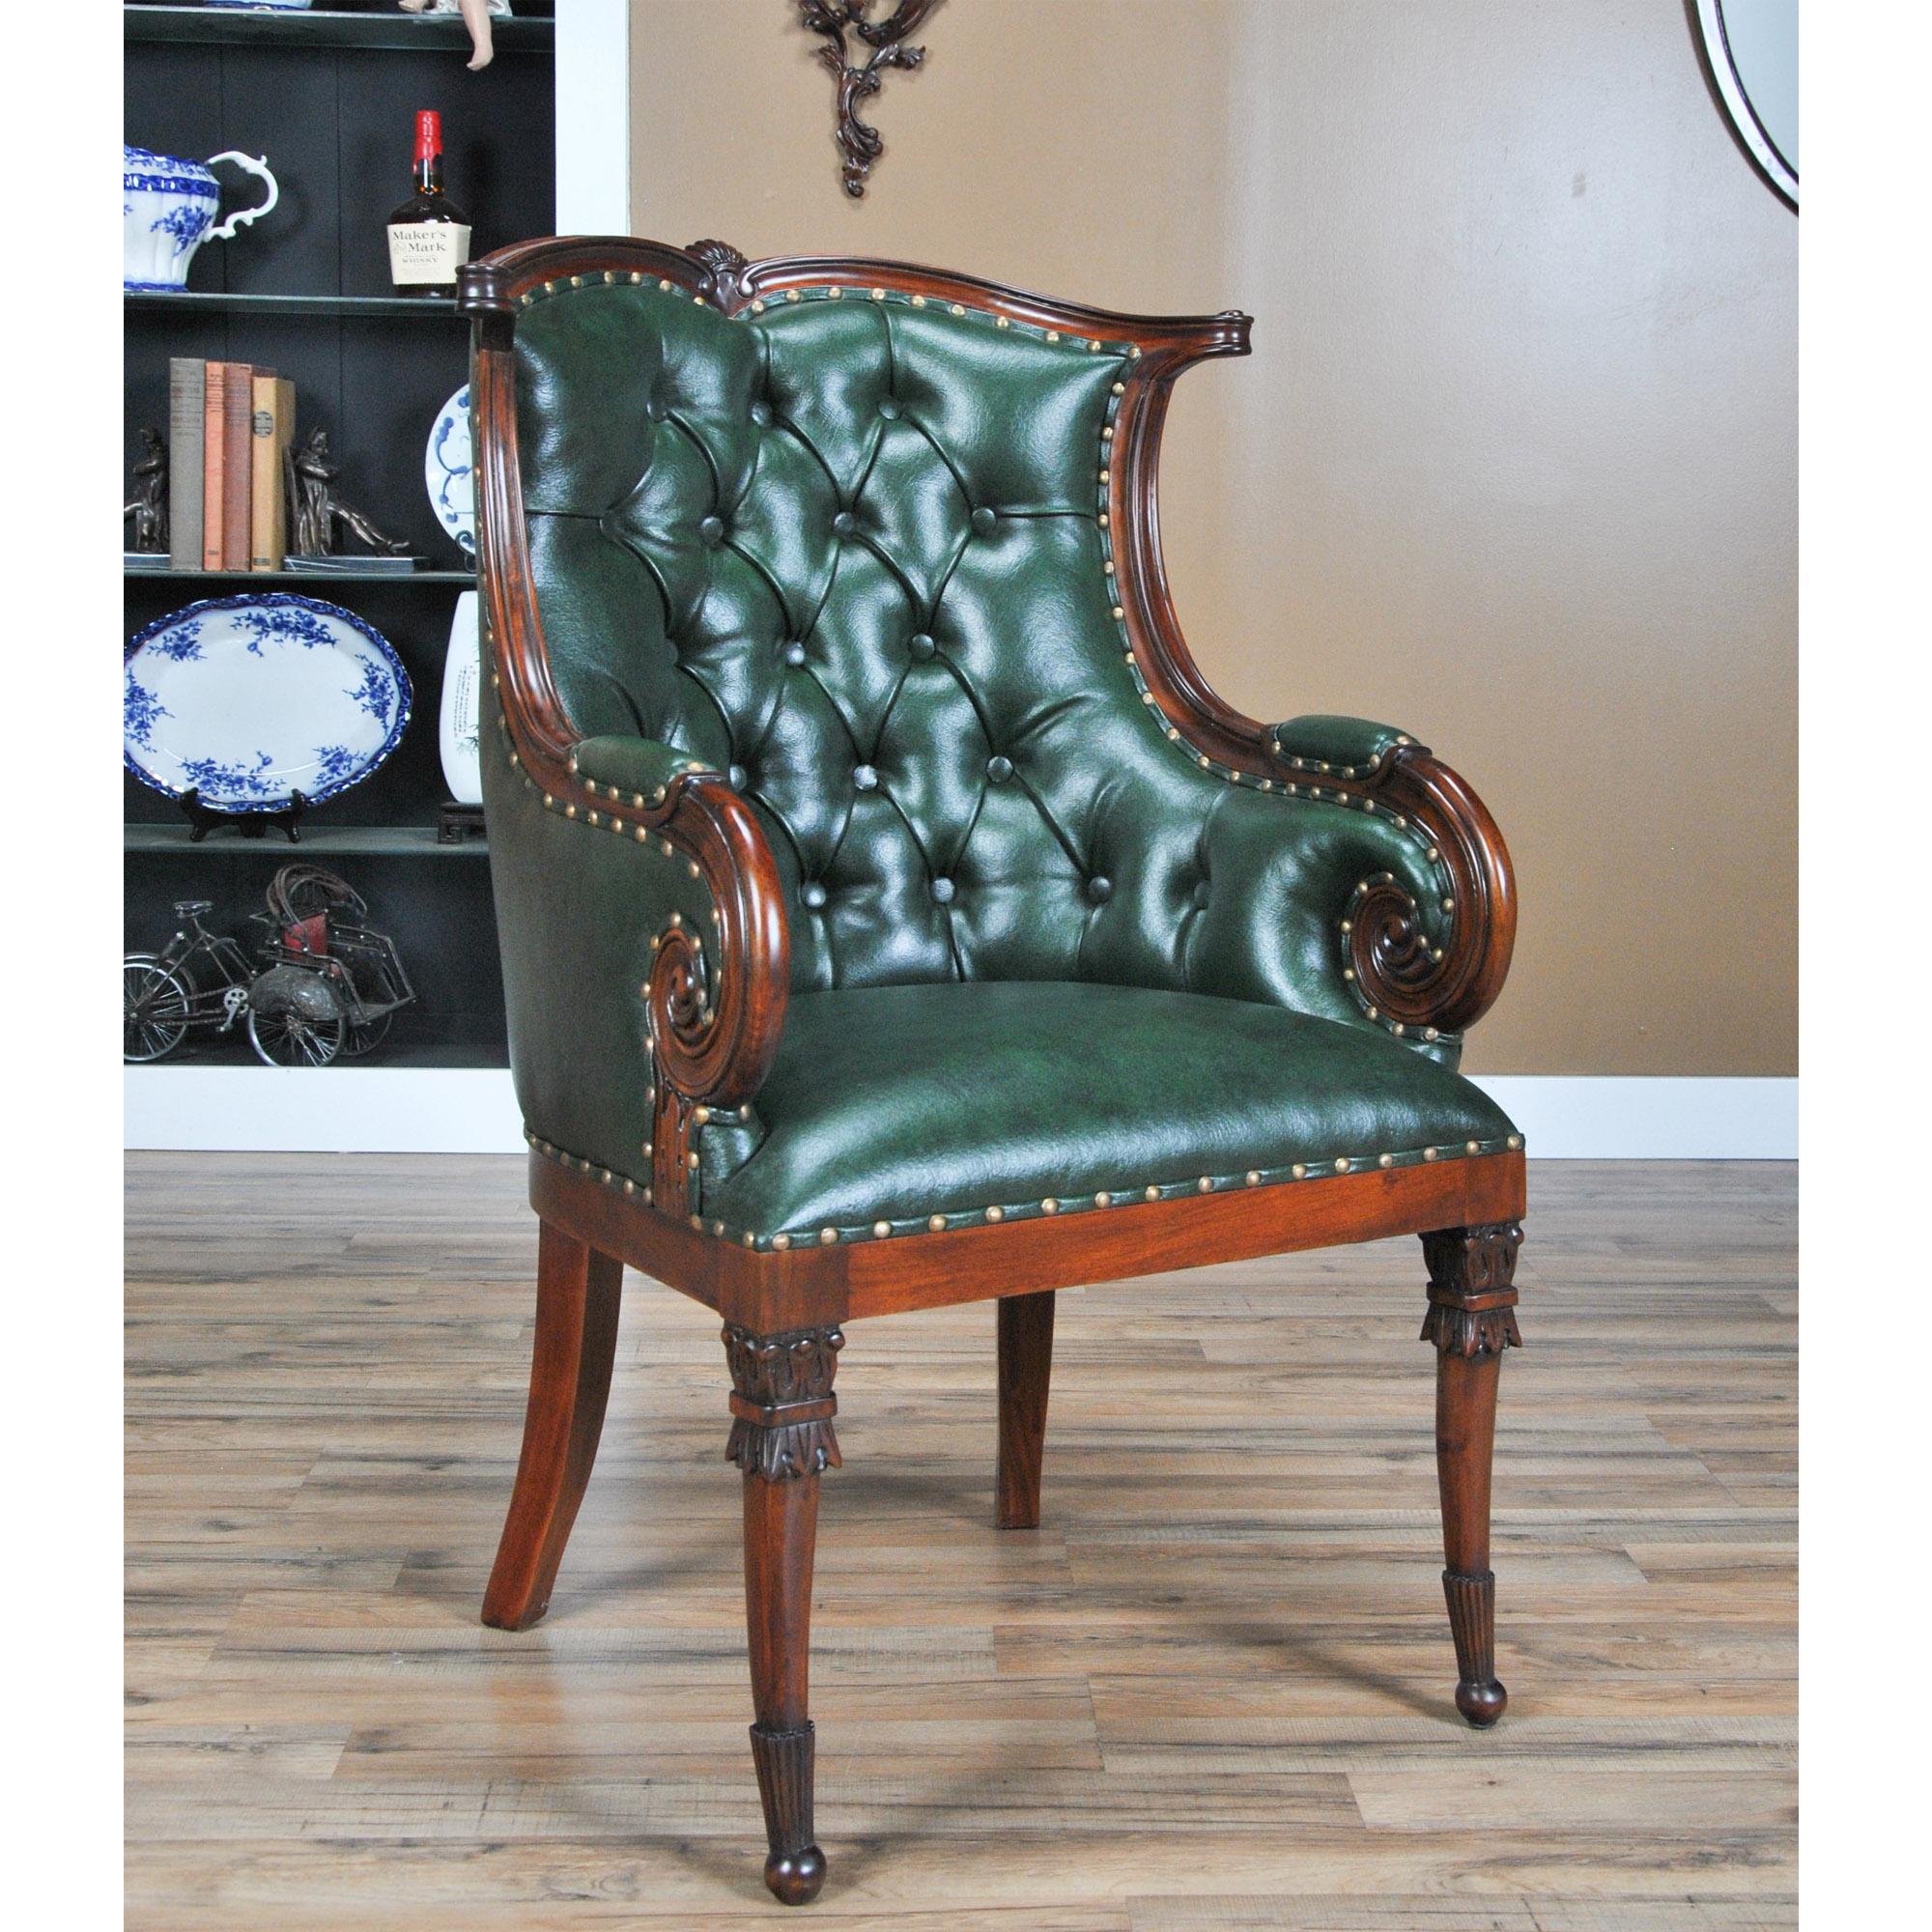 A fine quality Green Leather Arm Chair from Niagara furniture featuring a solid mahogany frame and full grain genuine leather. We had so many requests for our  traditional fireside chairs to be produced for use in the dining room that we adapted